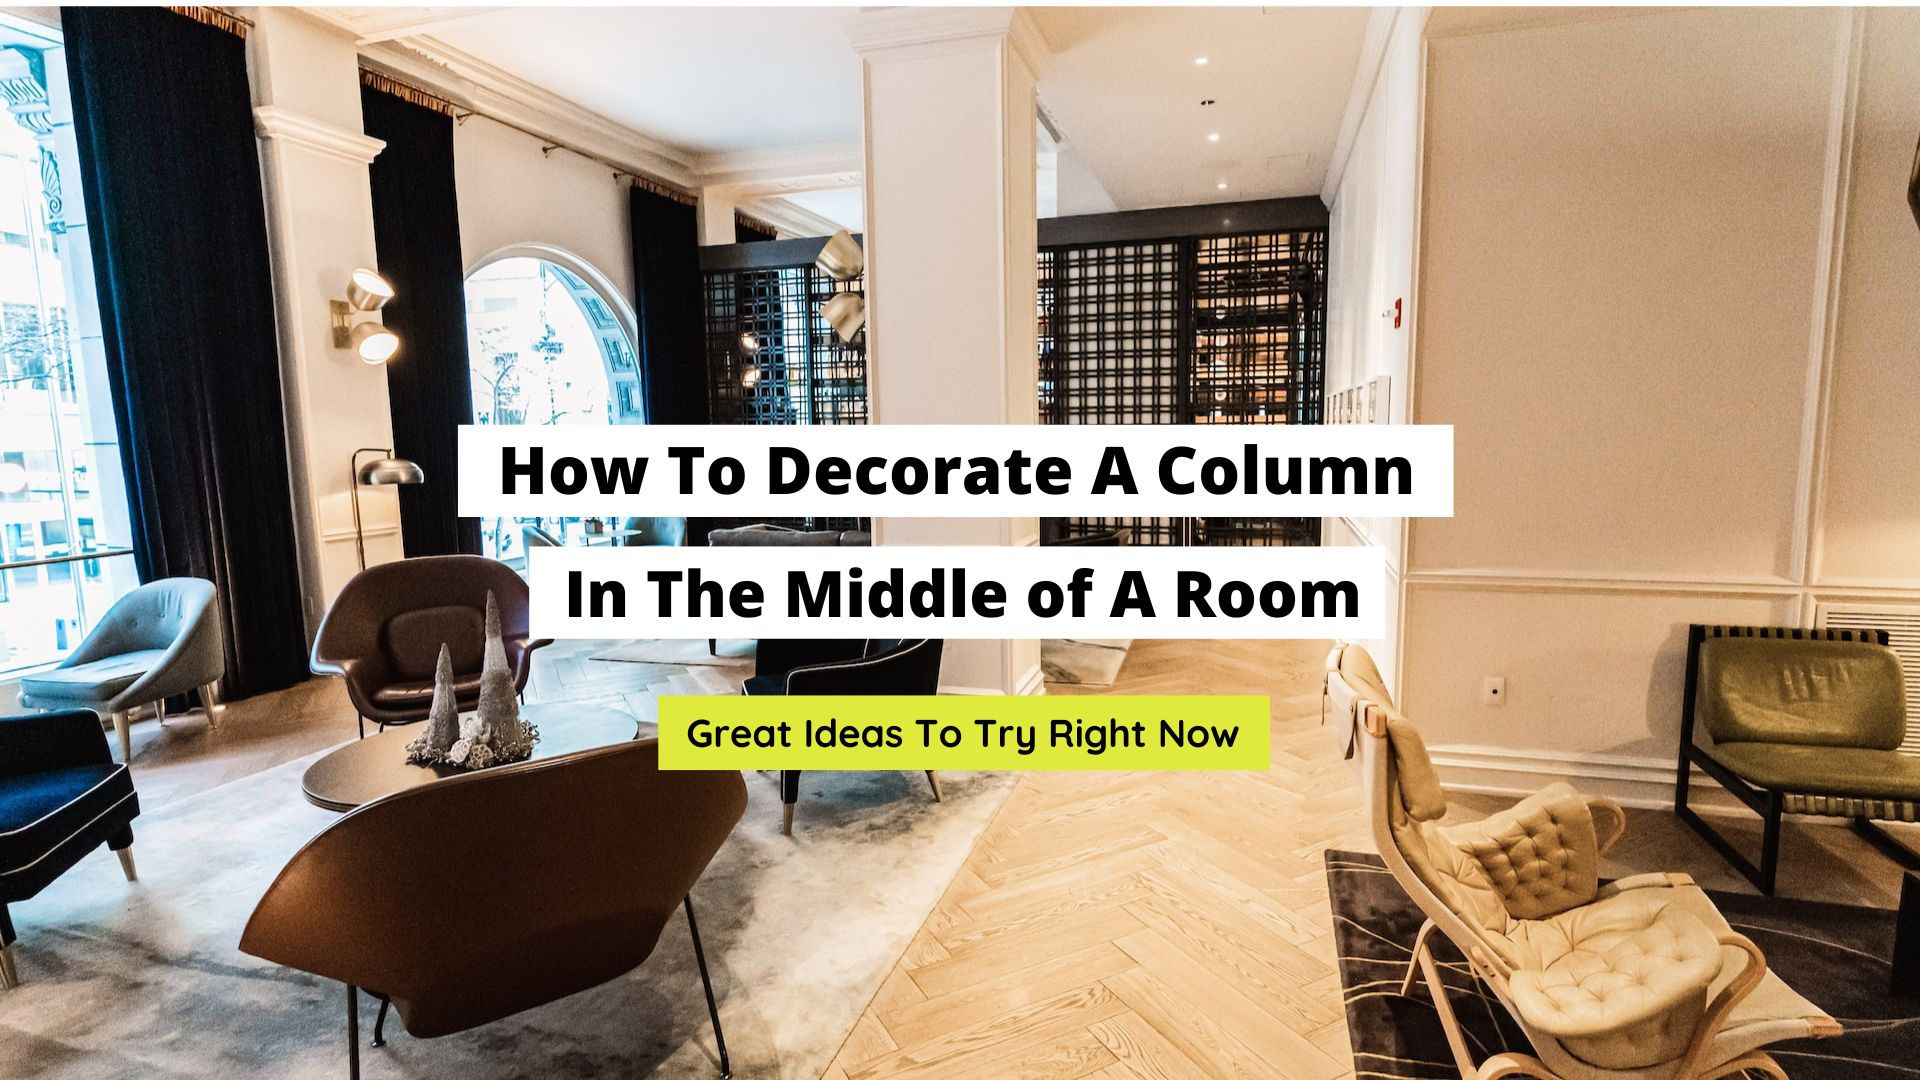 How To Decorate A Column In Middle of a Room Craftsonfire